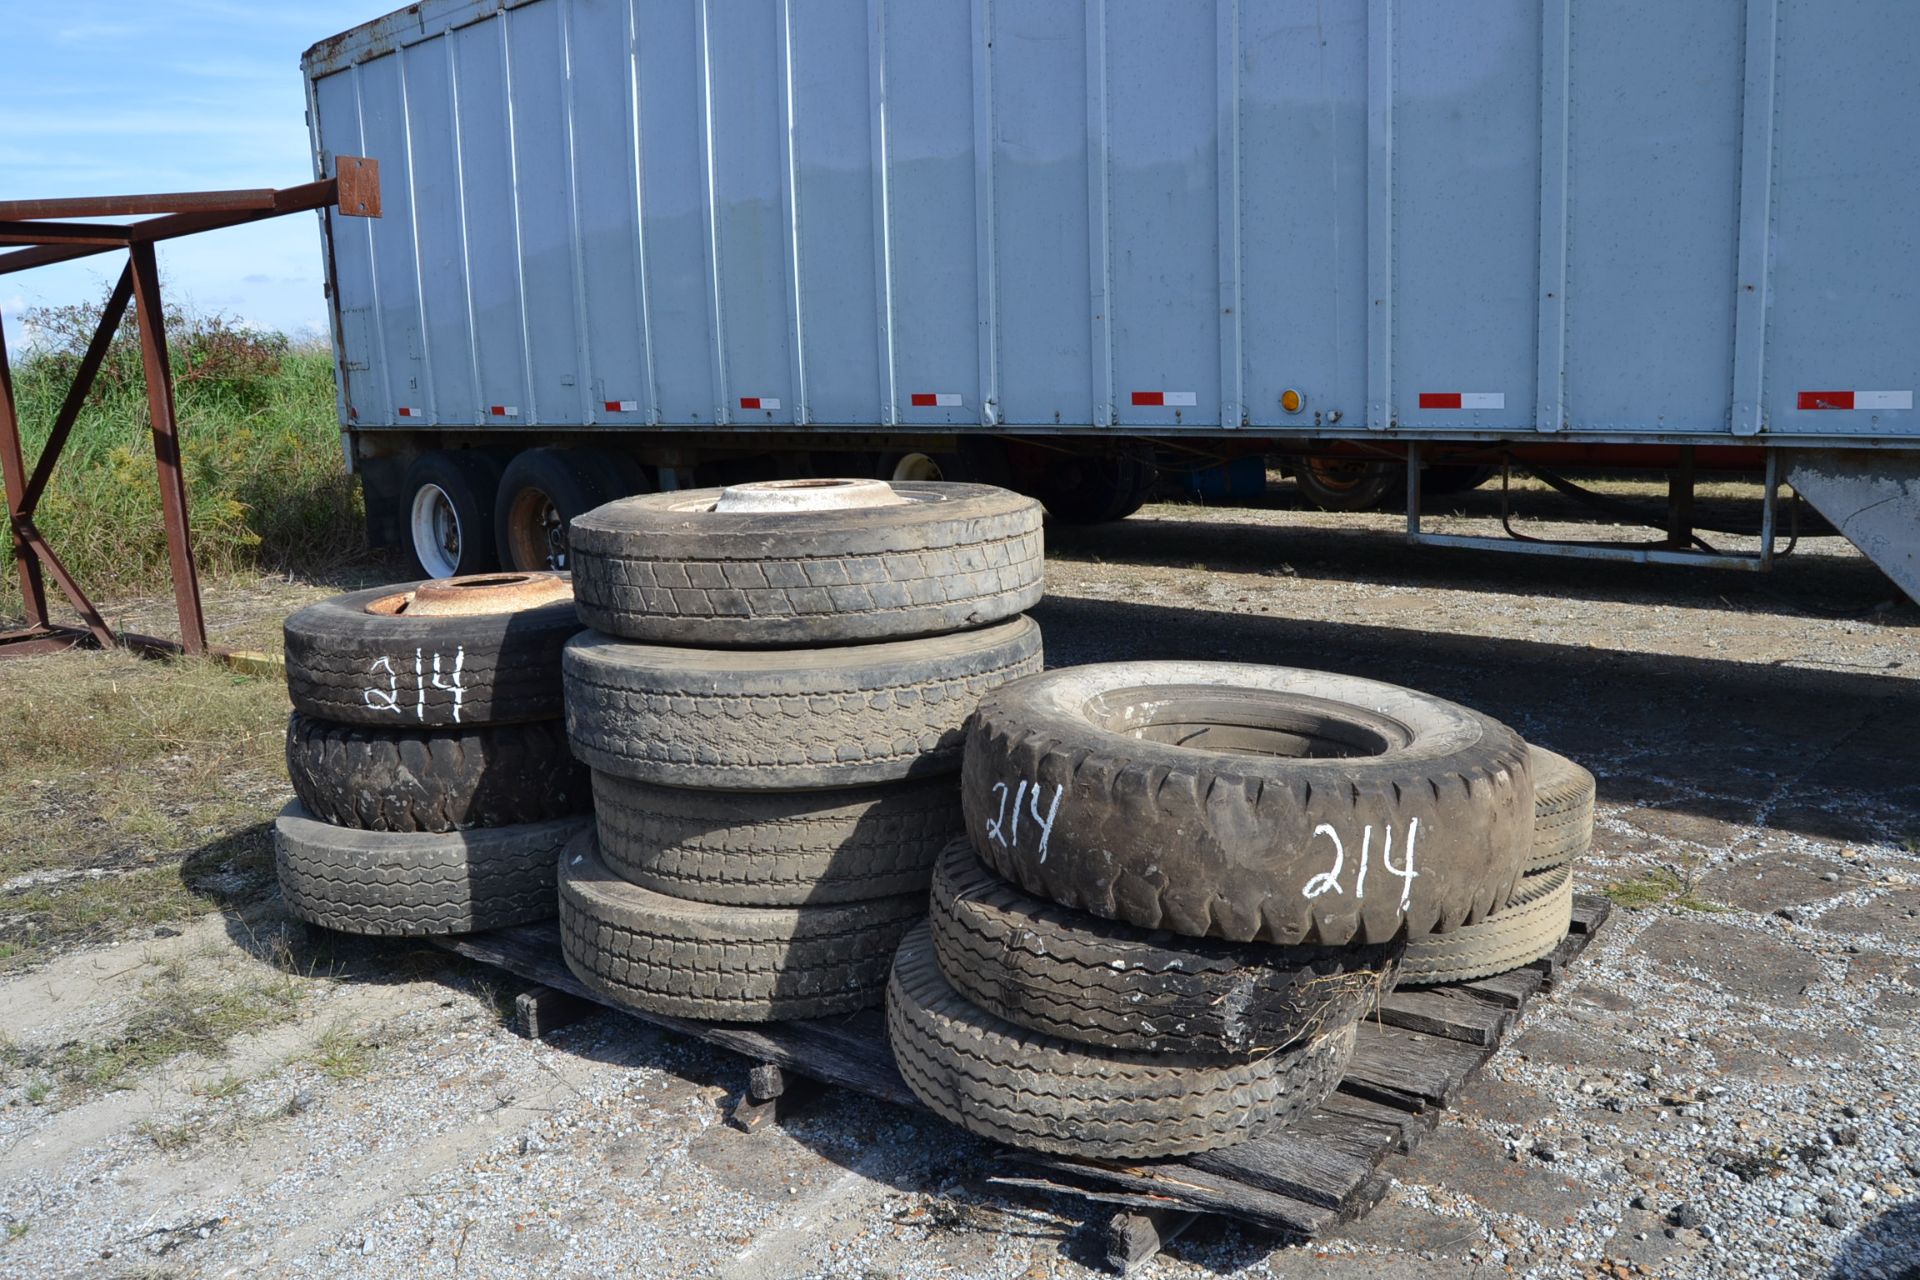 (4) 11R245 TIRES - Image 3 of 3